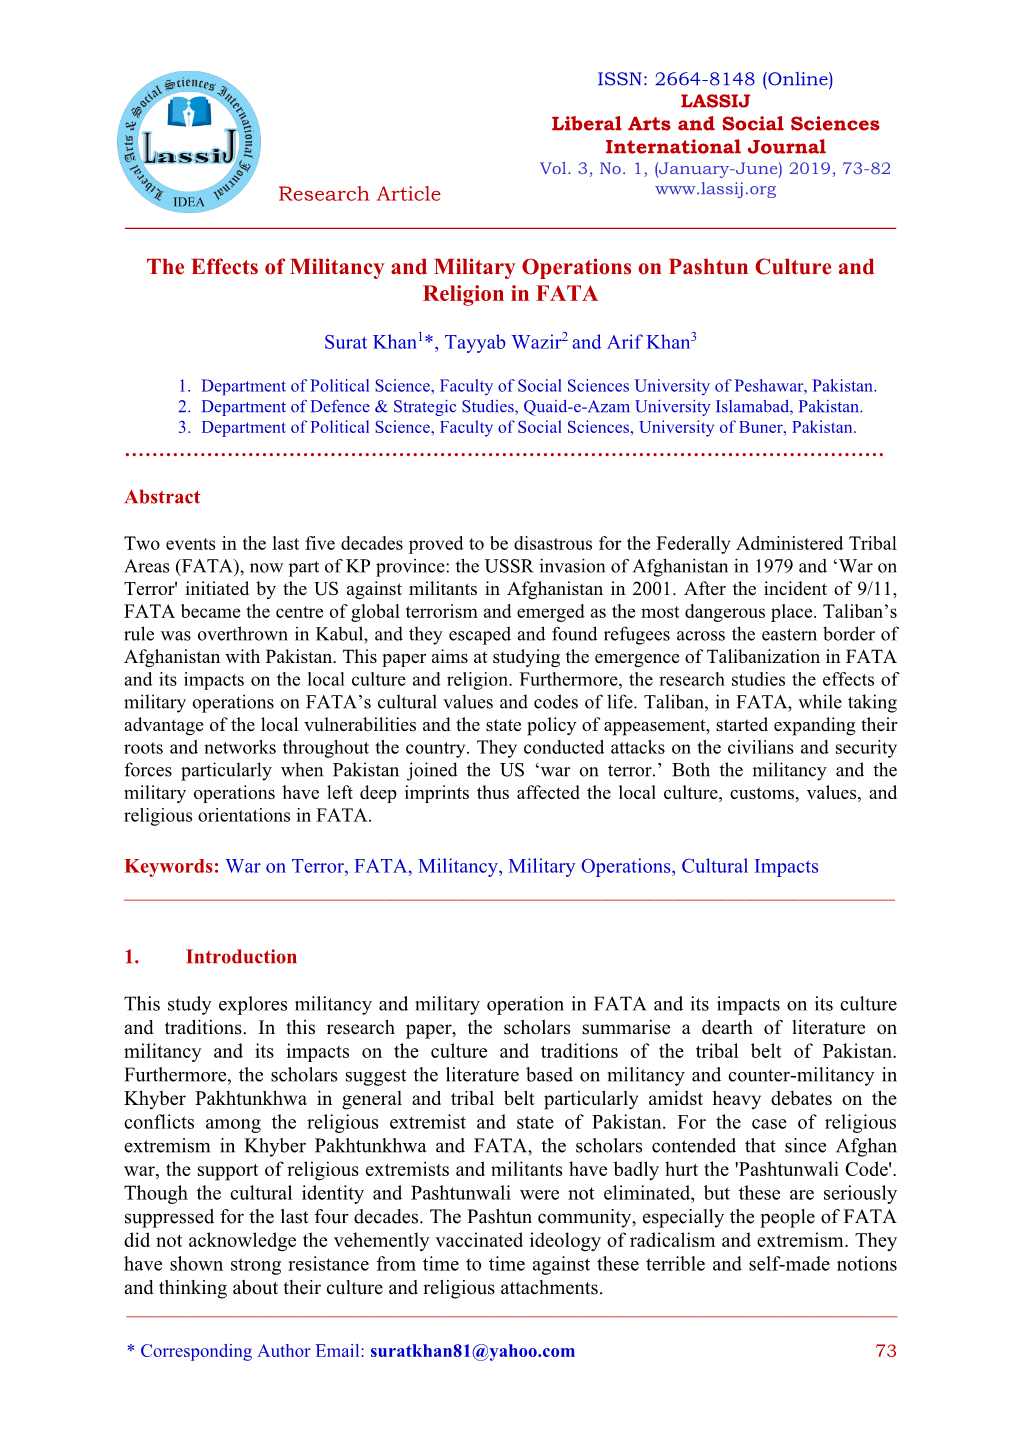 The Effects of Militancy and Military Operations on Pashtun Culture and Religion in FATA